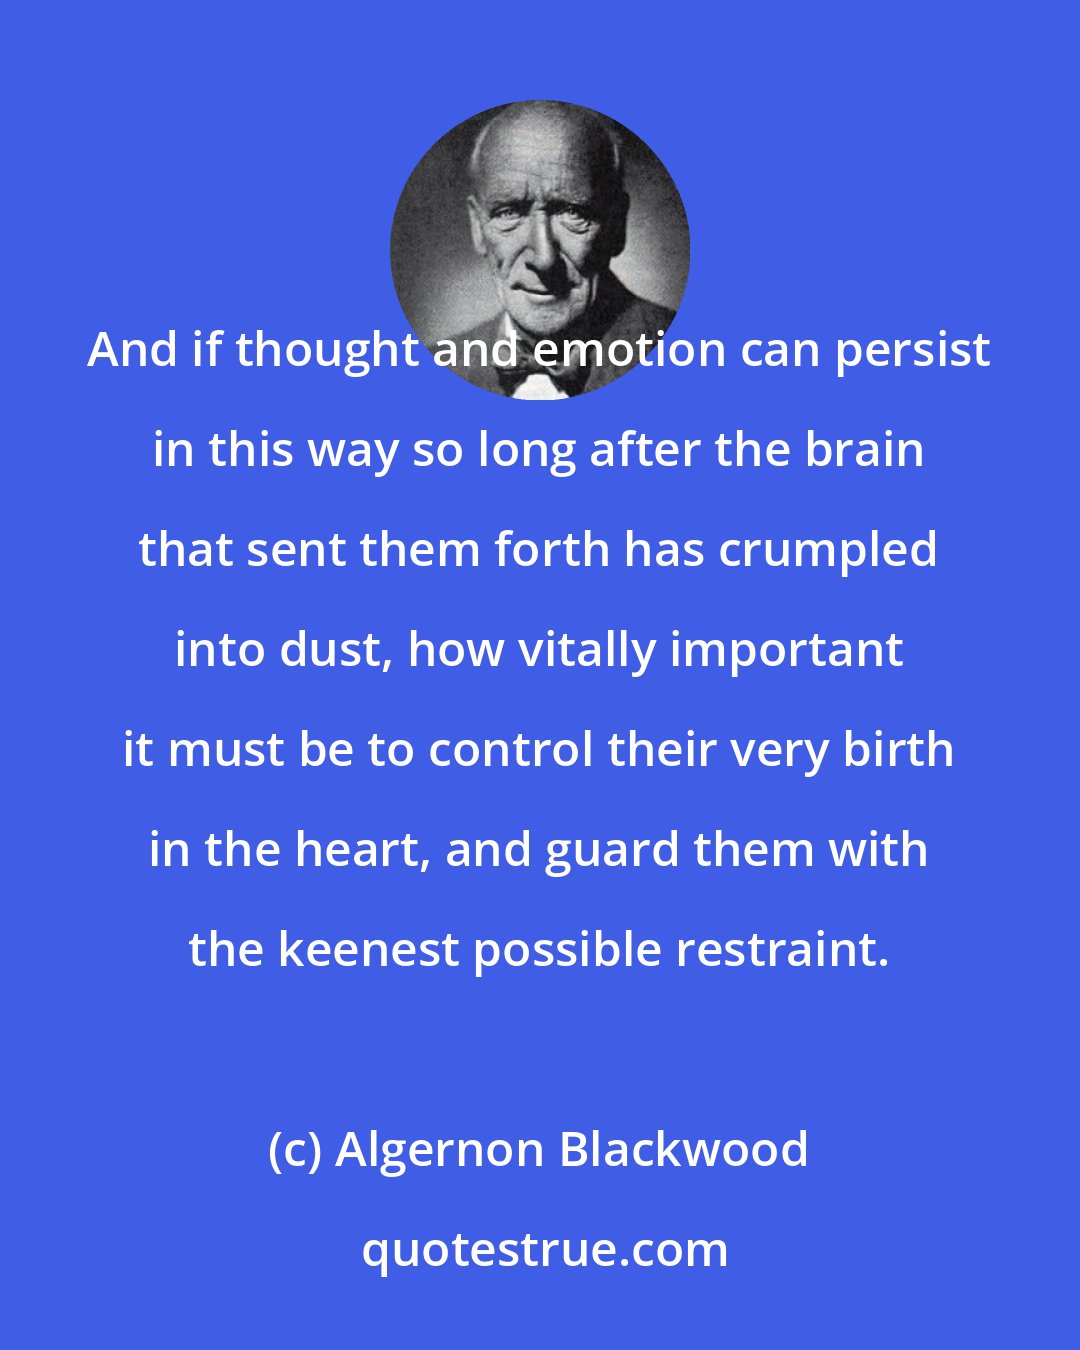 Algernon Blackwood: And if thought and emotion can persist in this way so long after the brain that sent them forth has crumpled into dust, how vitally important it must be to control their very birth in the heart, and guard them with the keenest possible restraint.